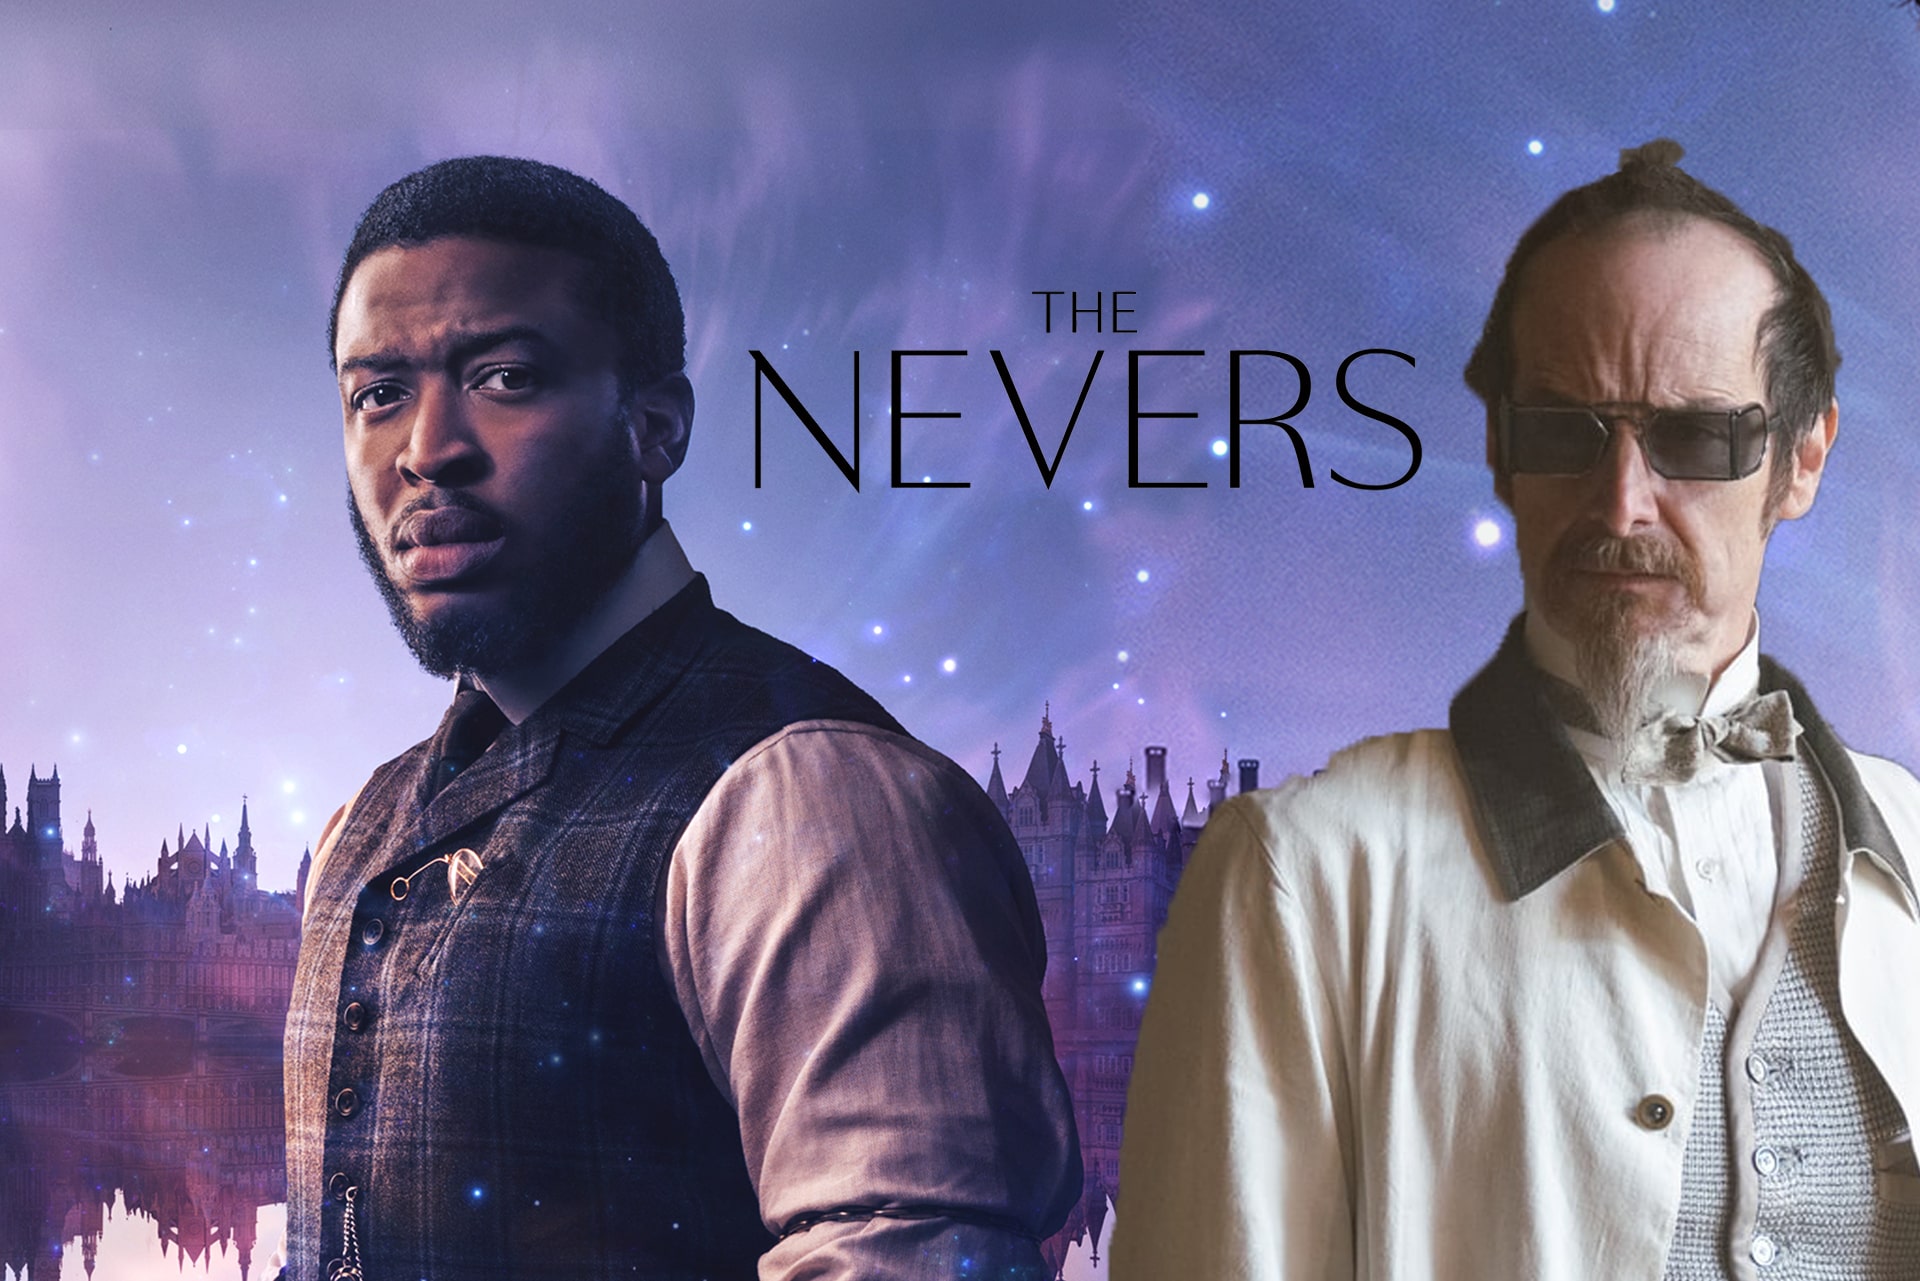 Unpredictable and original: Stars Zackary Momoh and Denis O'Hare on 'The Nevers'